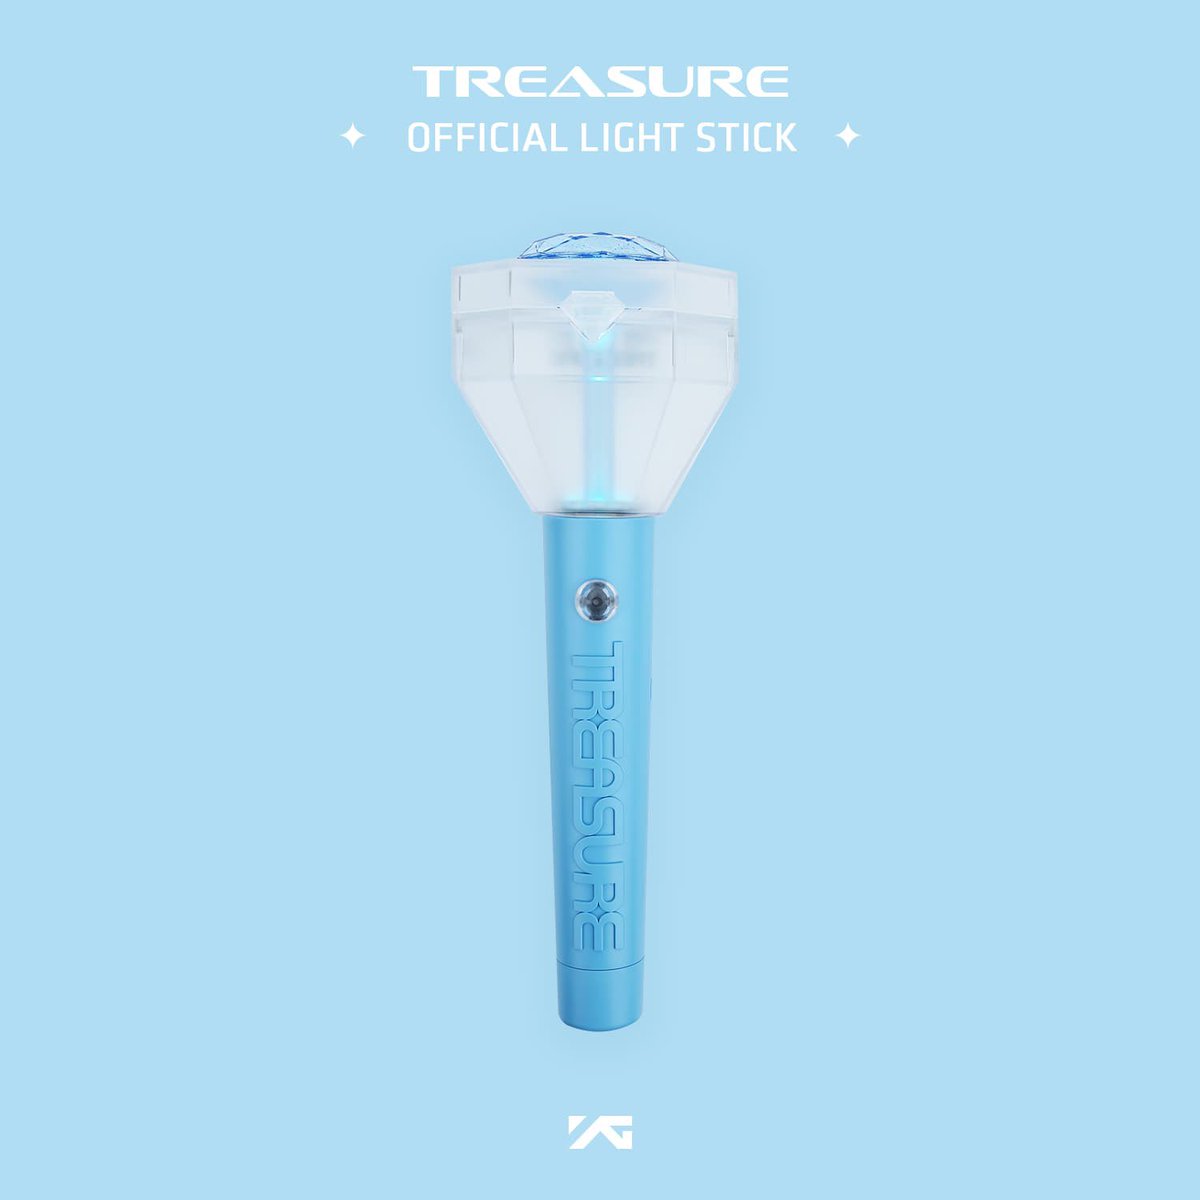 PAUBOS SALE #TREASURE_REBOOT_IN_MANILA TREASURE LIGHT STICK PHP 1900 SAME DAY DELIVERY ON MAY 3-4 OR PICK UP AT GOLDEN PHOENIX HOTEL LOBBY ON MAY 3-4 30 pcs only